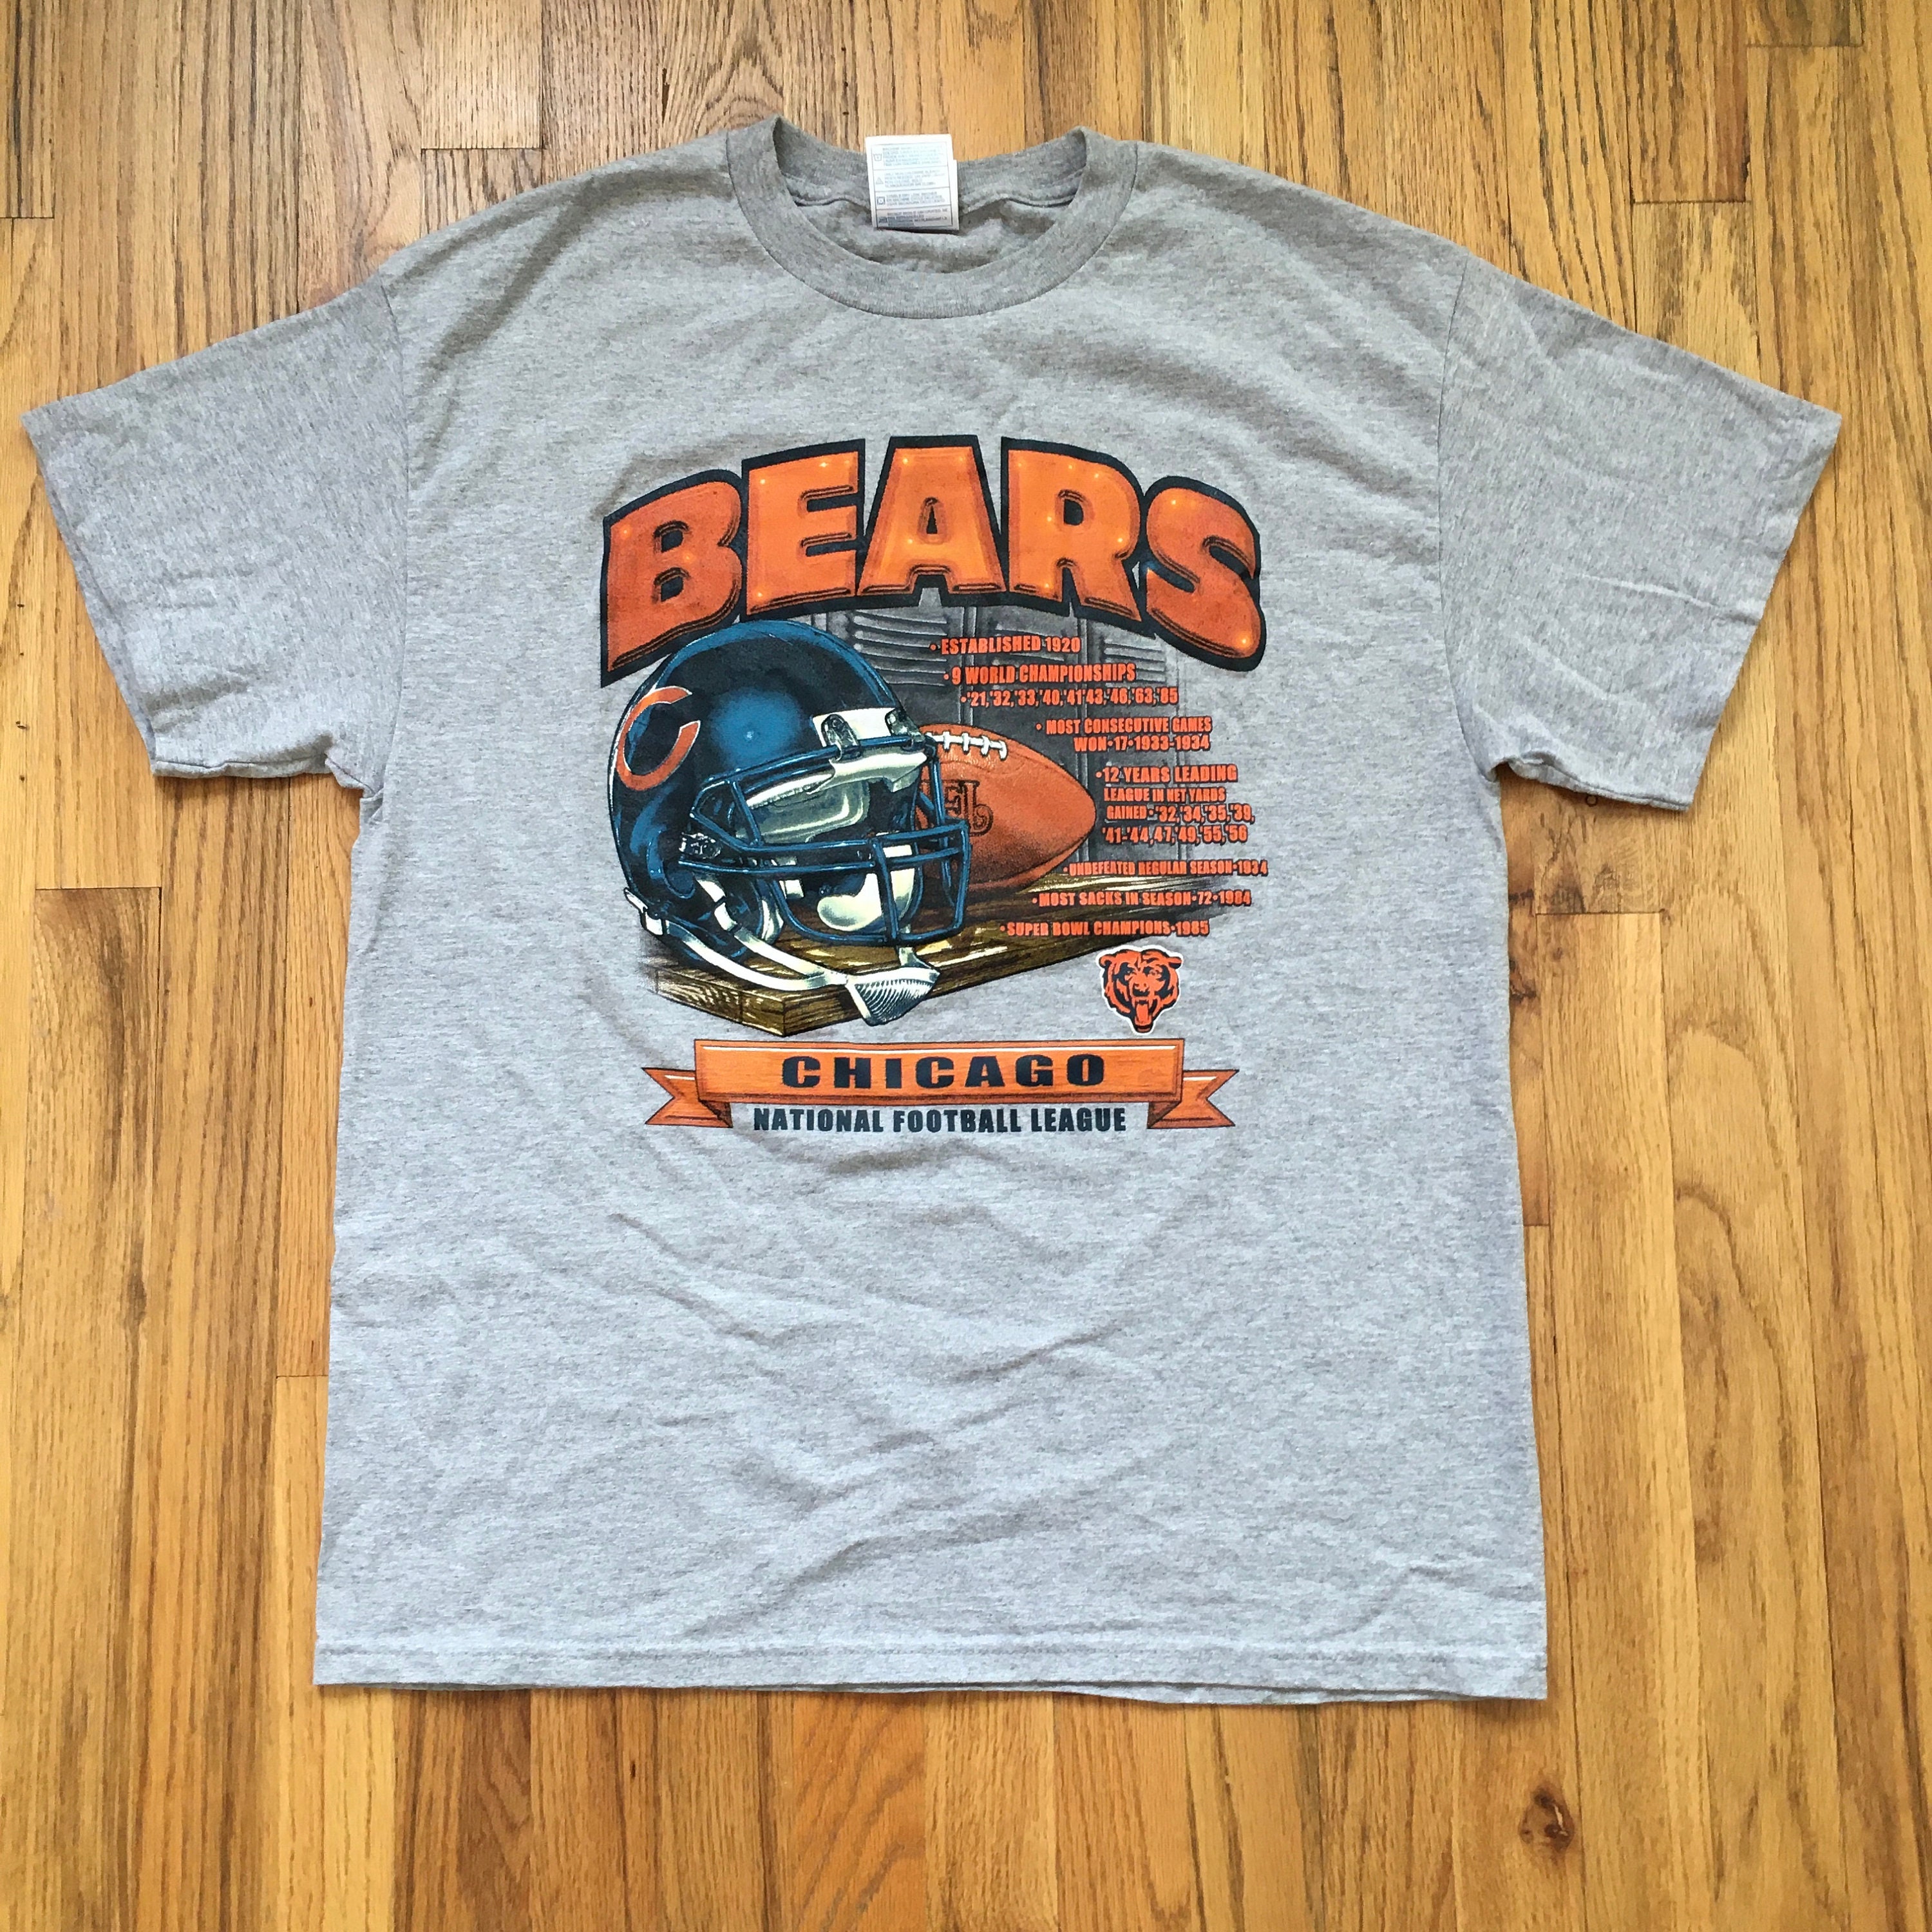 Vintage Chicago Bears Shirt New Without Tags NWOT Deadstock